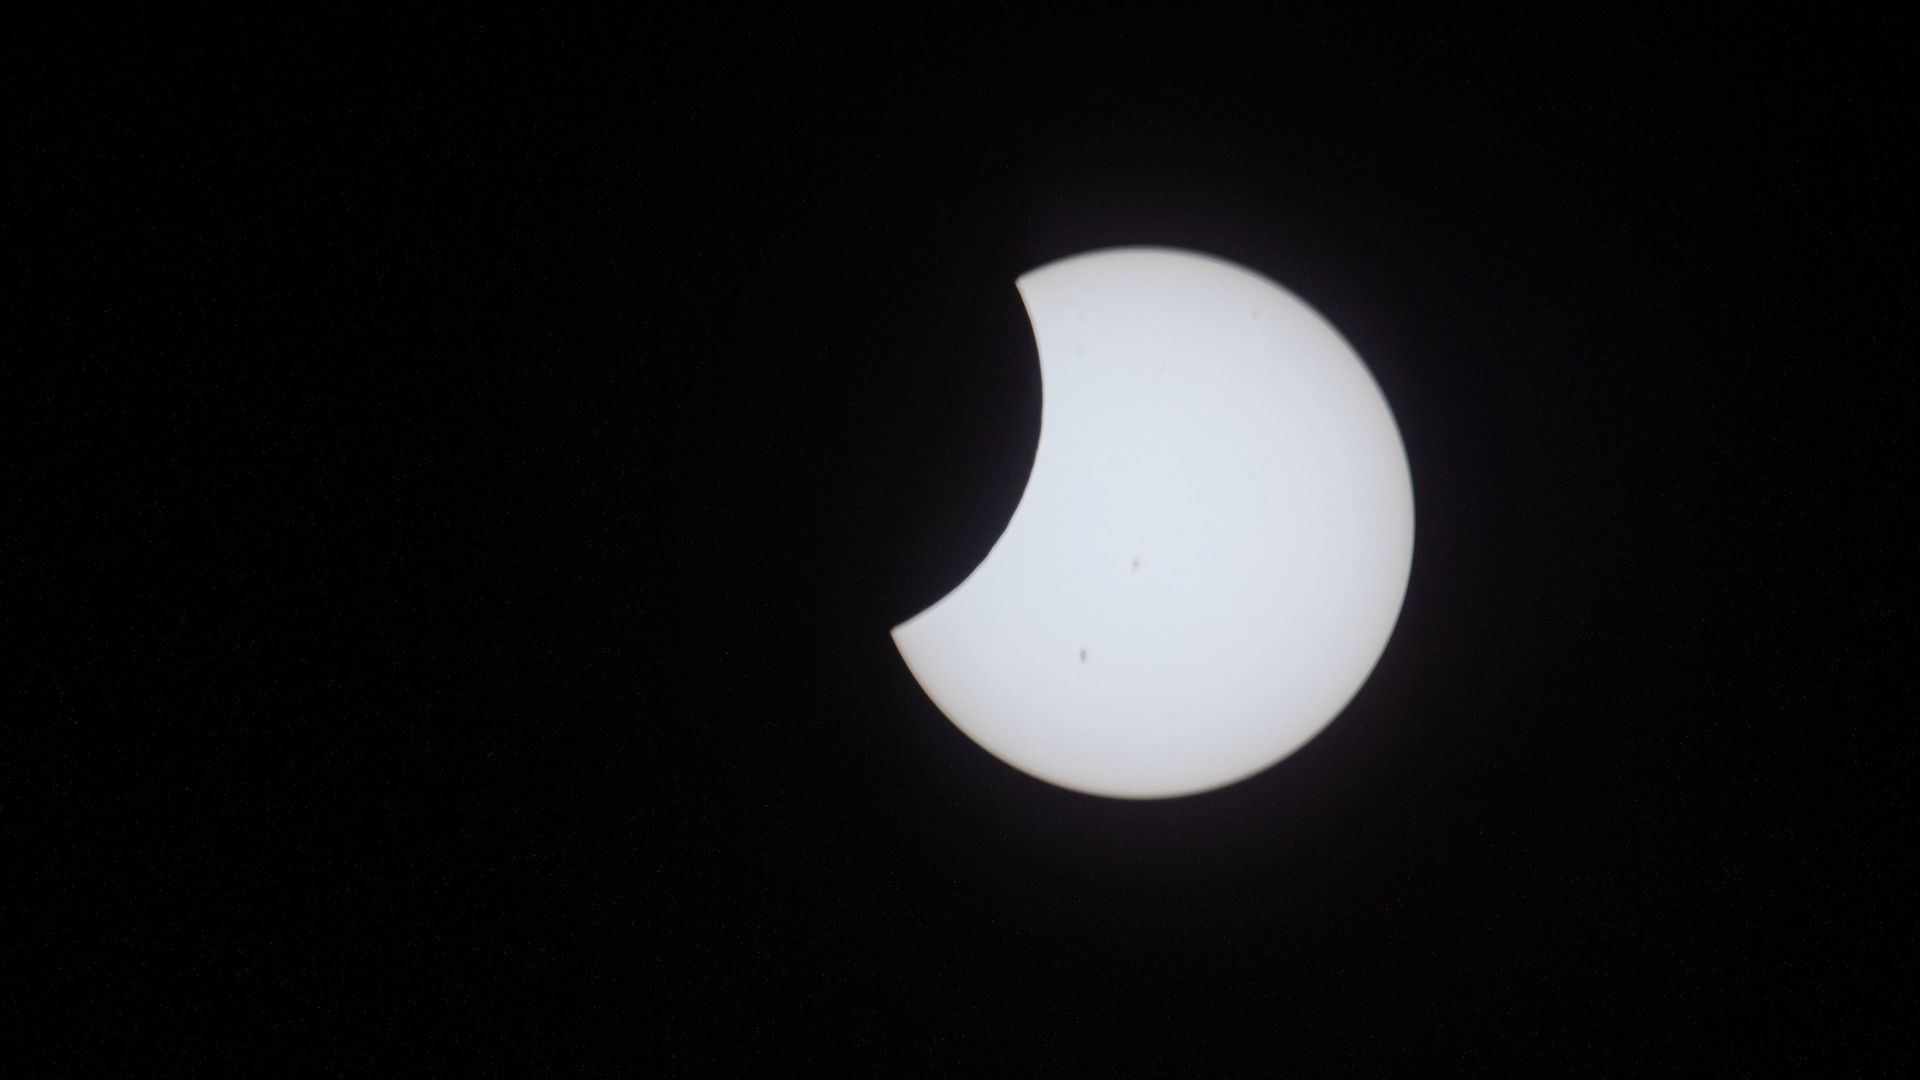 The Moon passes in front of the Sun during a partial solar eclipse as seen from the International Space Station